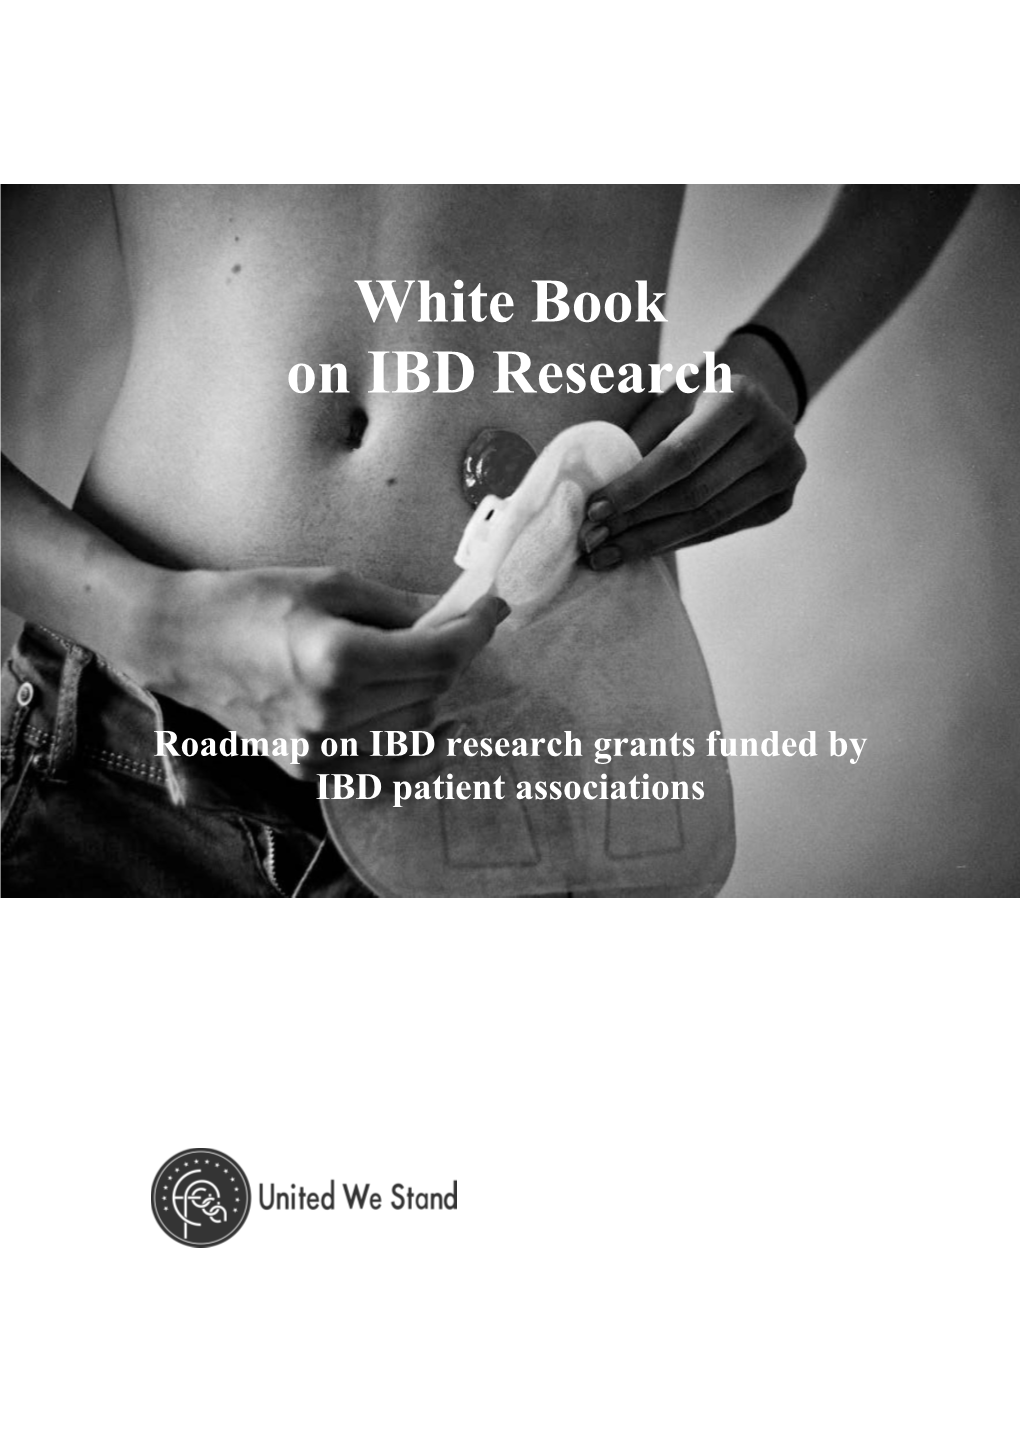 White Book on IBD Research